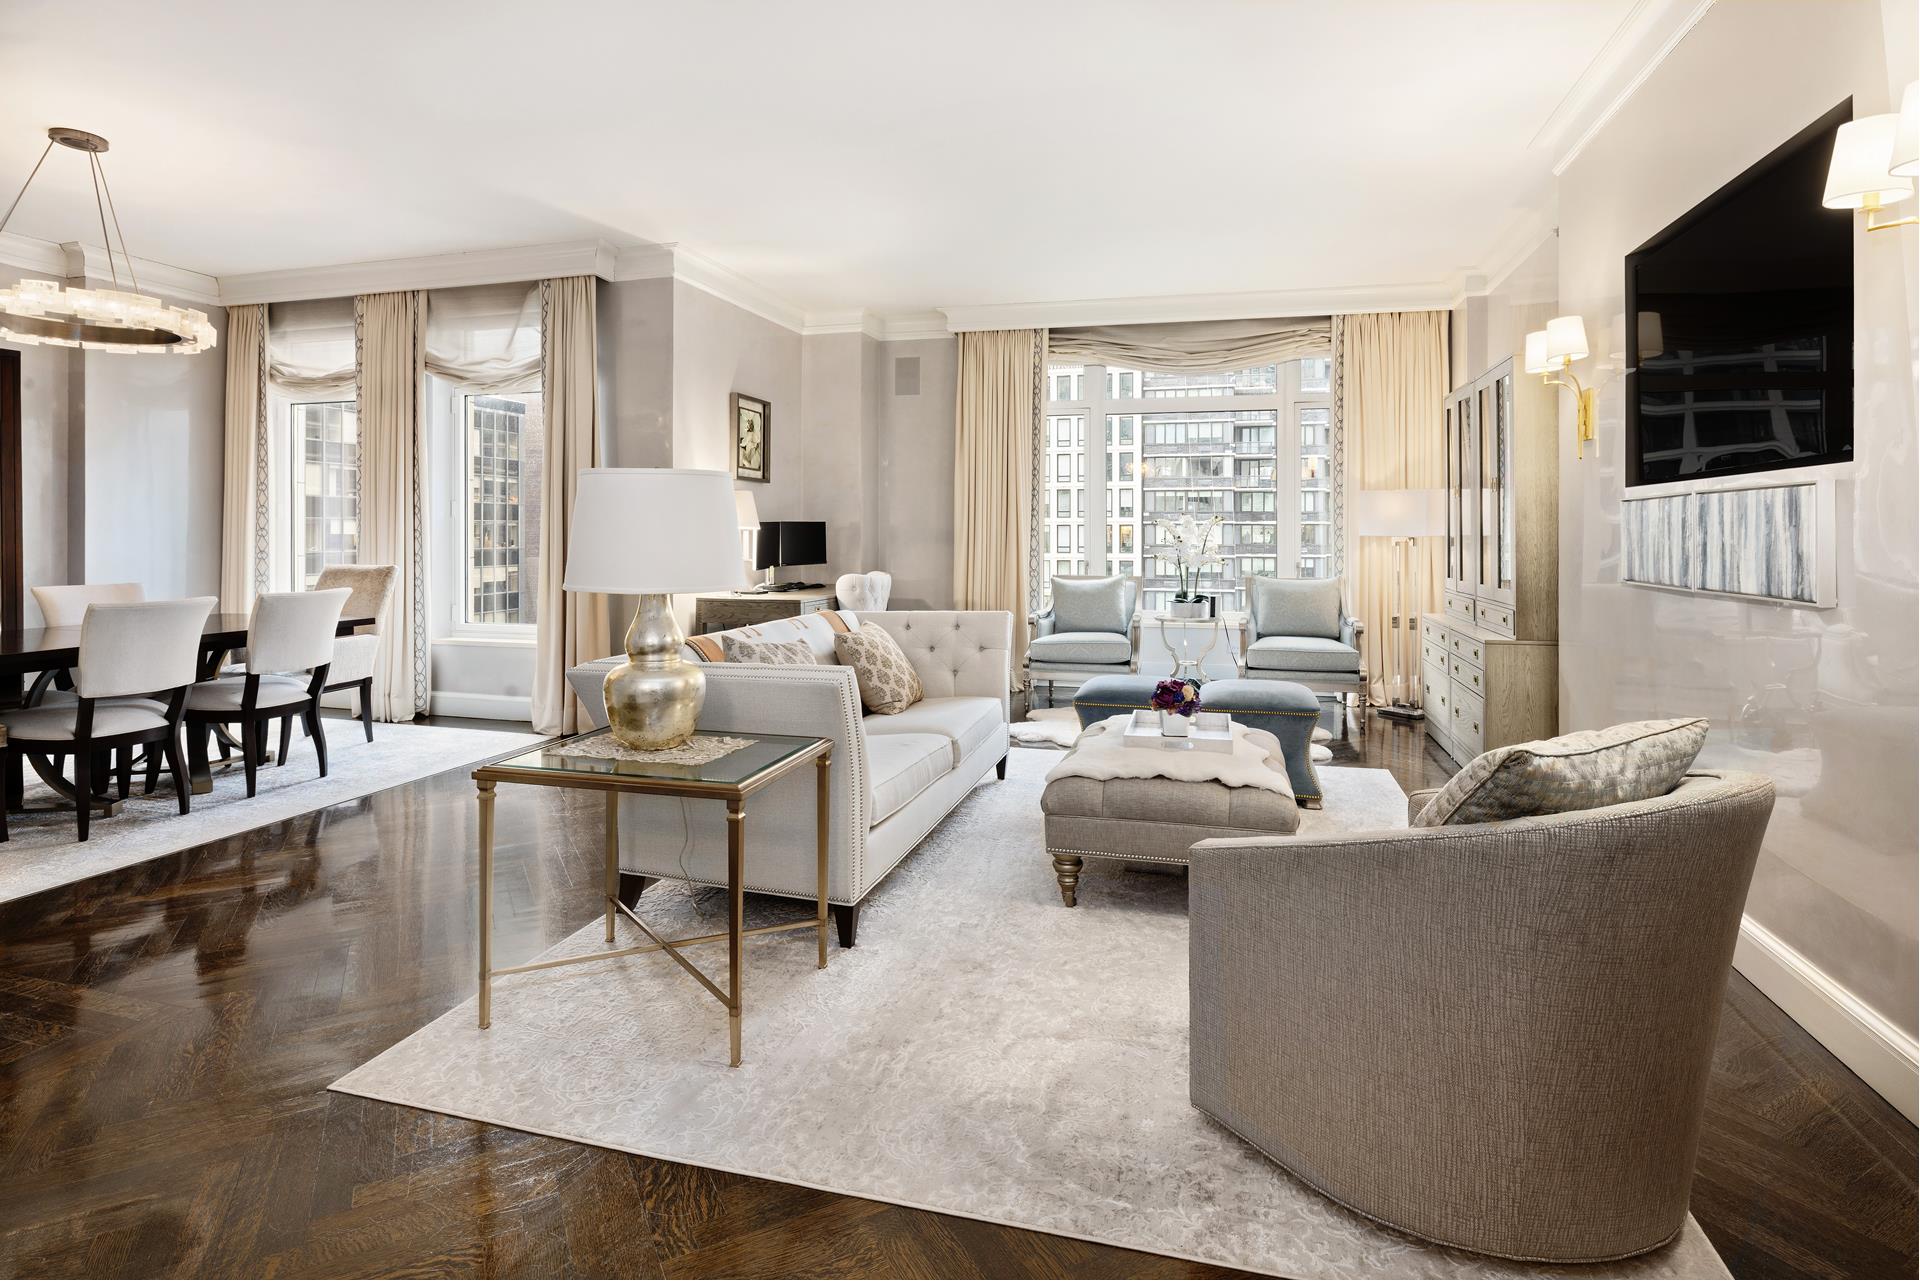 15 Central Park 12L, Lincoln Sq, Upper West Side, NYC - 2 Bedrooms  
2 Bathrooms  
5 Rooms - 